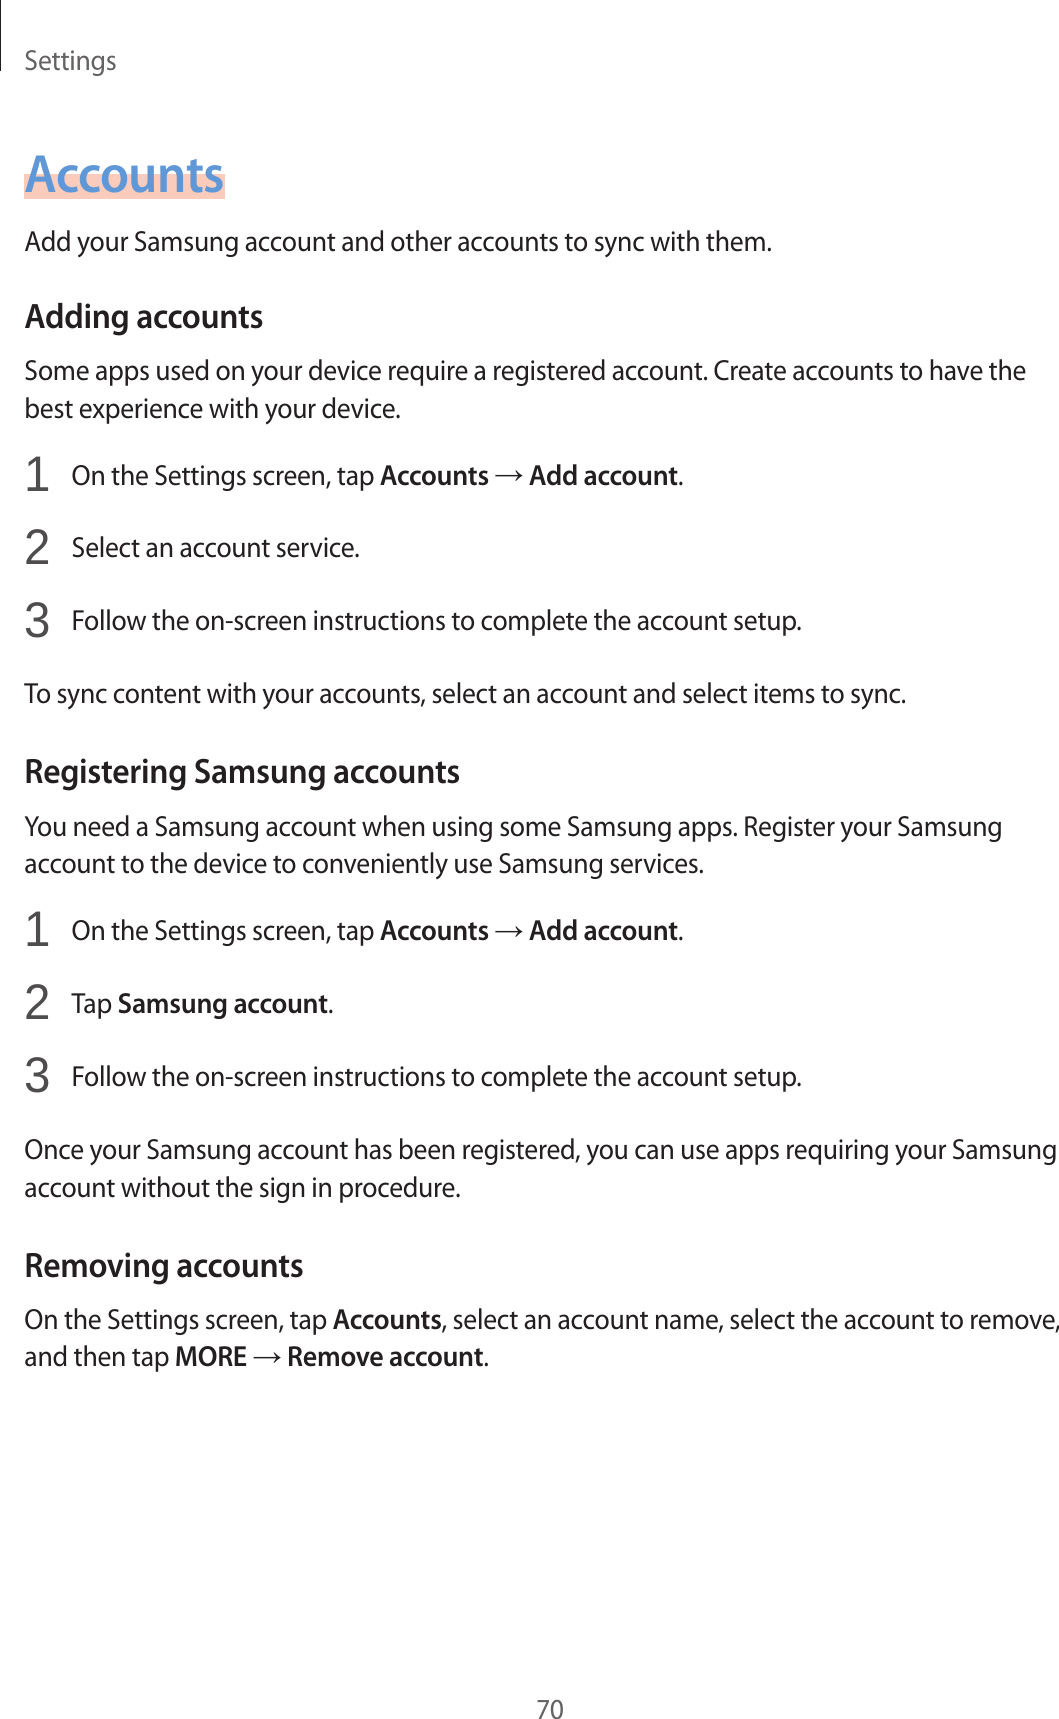 Settings70AccountsAdd your Samsung account and other accounts to sync with them.Adding accountsSome apps used on your device require a registered account. Create accounts to have the best experience with your device.1  On the Settings screen, tap Accounts → Add account.2  Select an account service.3  Follow the on-screen instructions to complete the account setup.To sync content with your accounts, select an account and select items to sync.Registering Samsung accountsYou need a Samsung account when using some Samsung apps. Register your Samsung account to the device to conveniently use Samsung services.1  On the Settings screen, tap Accounts → Add account.2  Tap Samsung account.3  Follow the on-screen instructions to complete the account setup.Once your Samsung account has been registered, you can use apps requiring your Samsung account without the sign in procedure.Removing accountsOn the Settings screen, tap Accounts, select an account name, select the account to remove, and then tap MORE → Remove account.